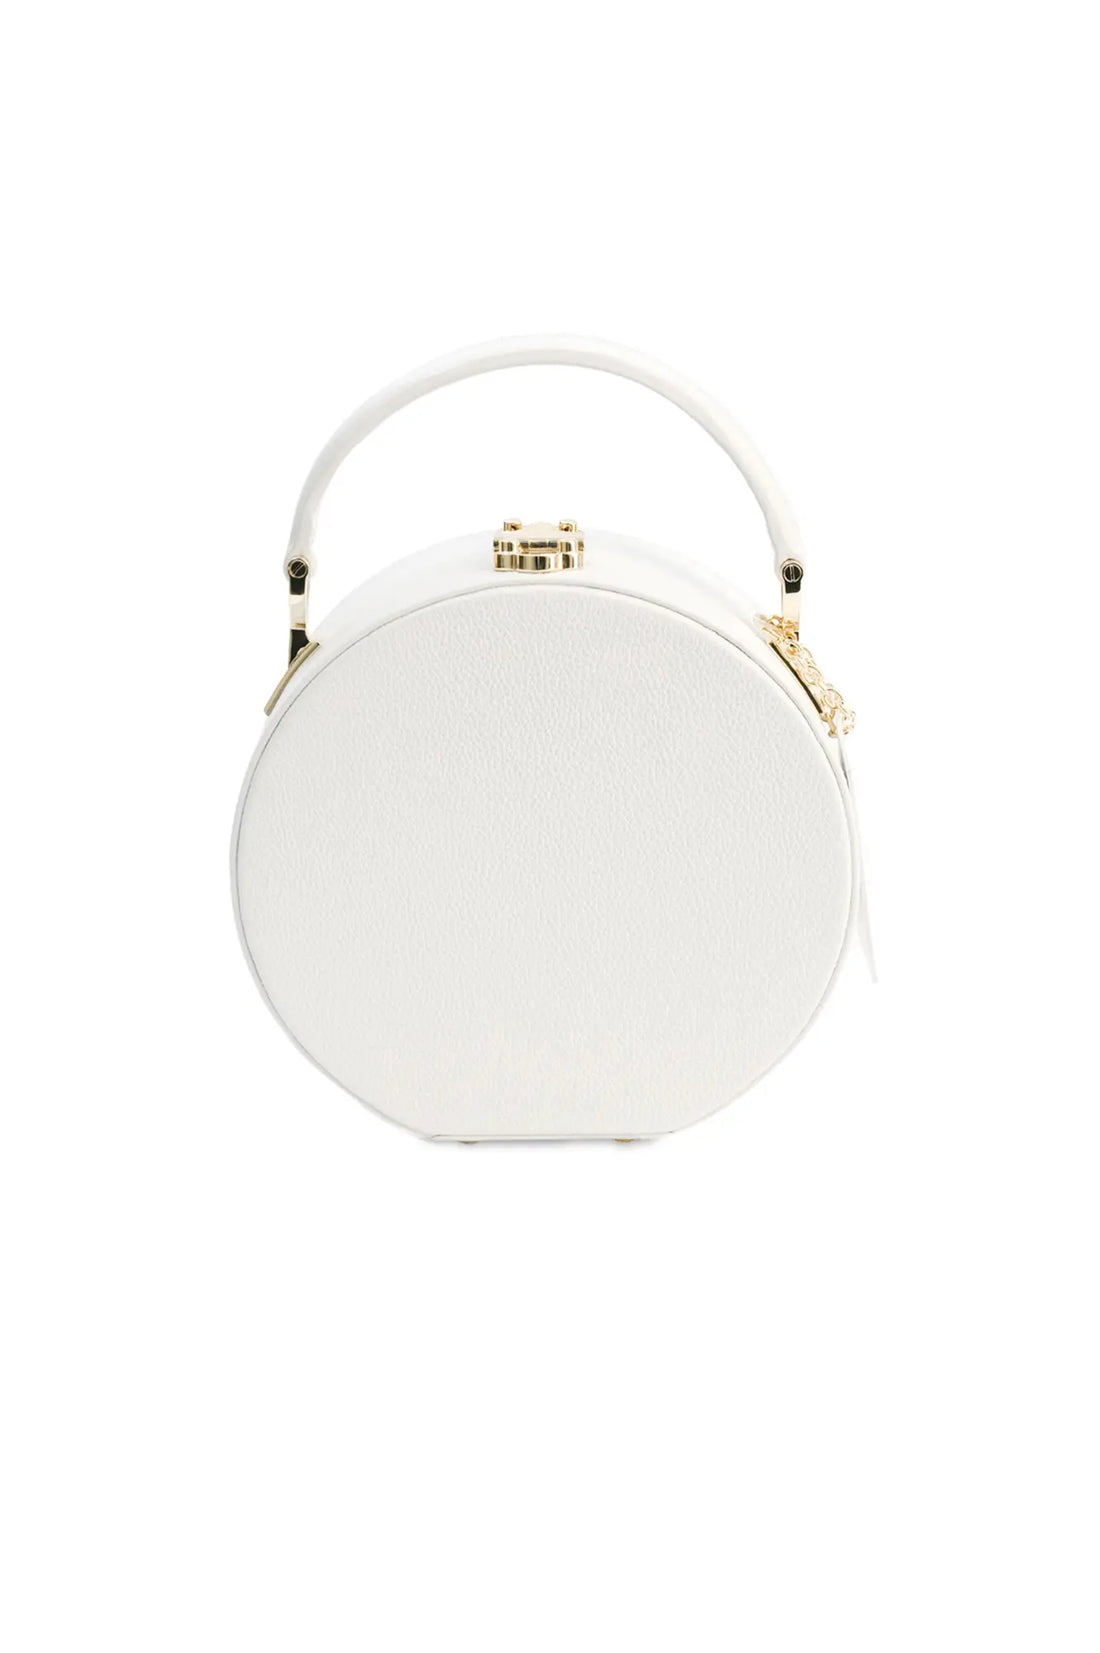 A white round leather handbag with a metallic clasp from The Bella Rosa Collection's Original Hat Box, on a white background.